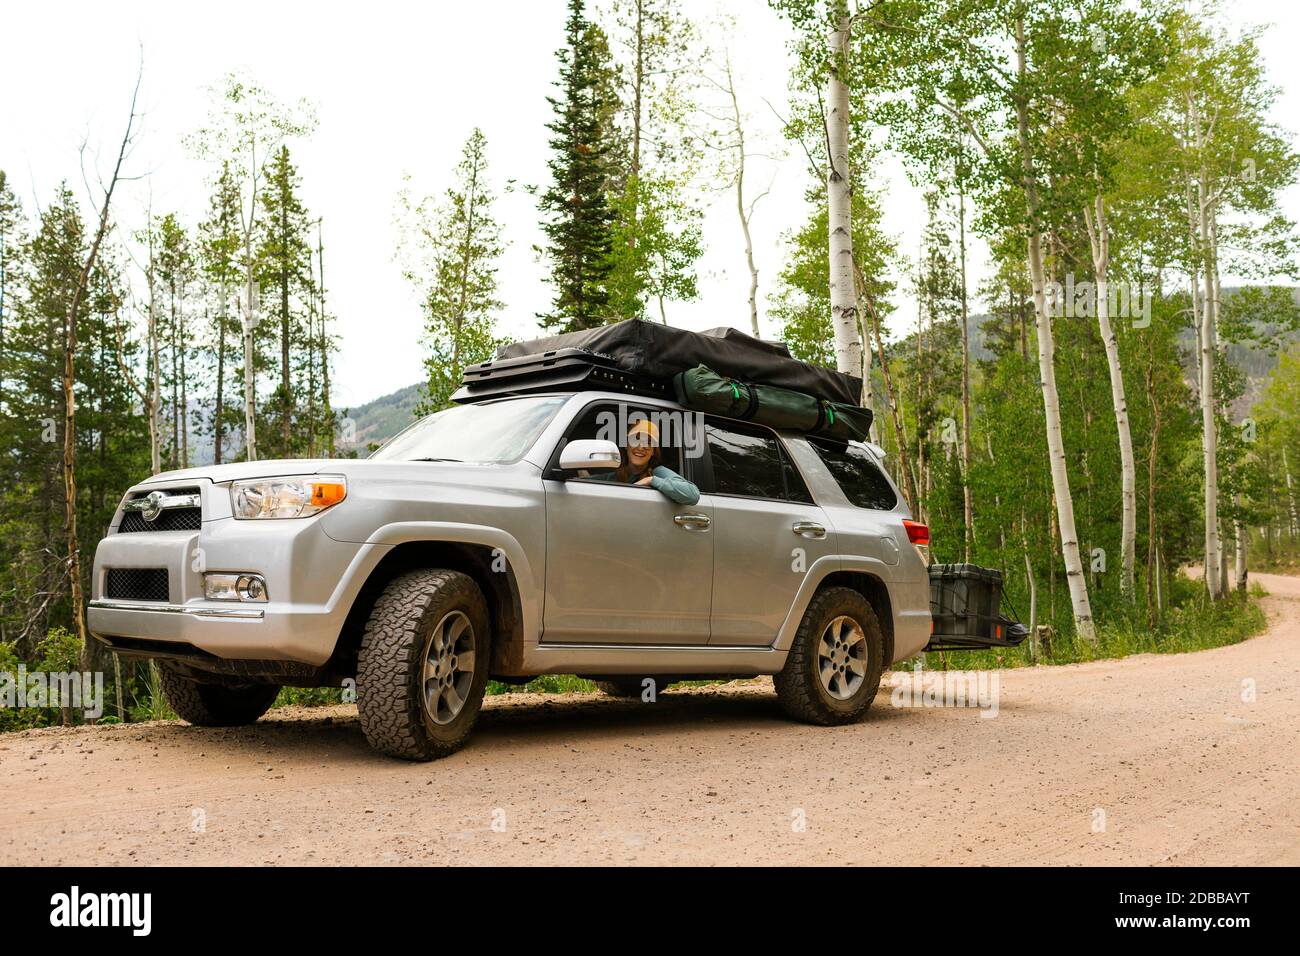 USA, Utah, Uinta National Park, Woman sitting in off road car with tent on roof Stock Photo